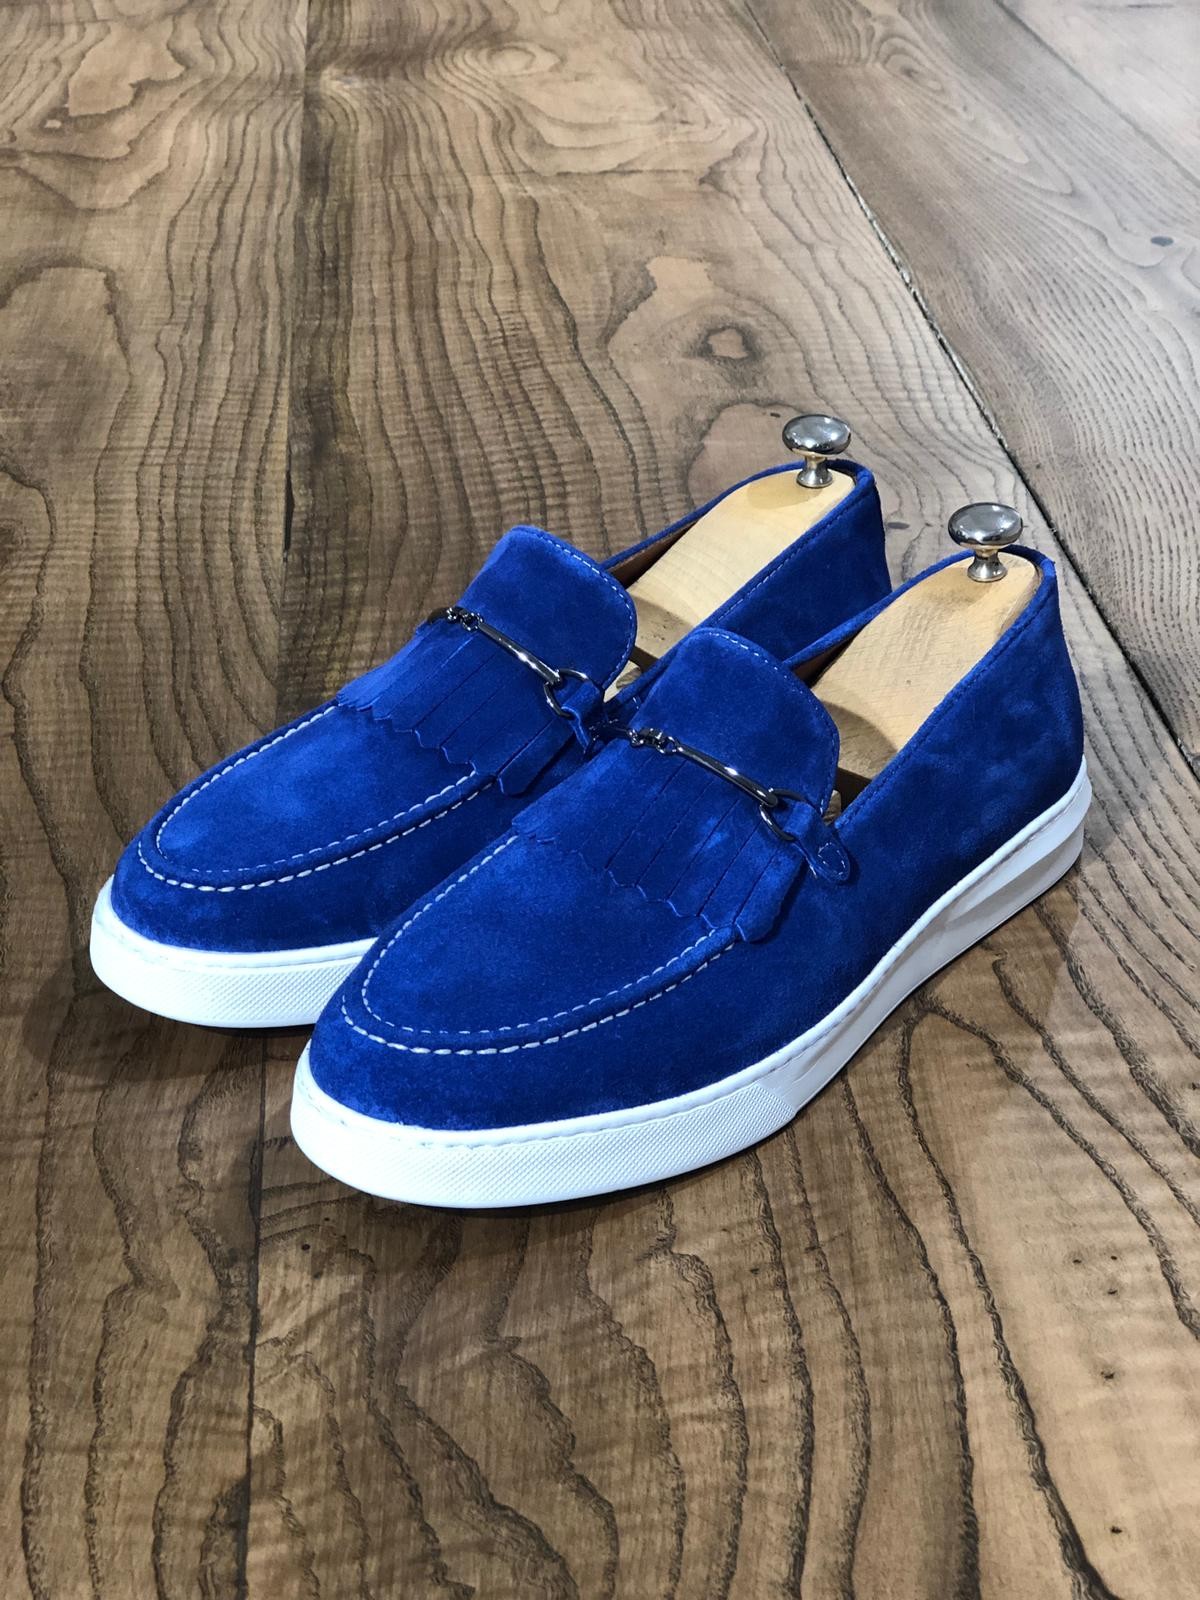 Buy Sax Kilt Espadrille Loafer by Gentwith.com with Free Shipping